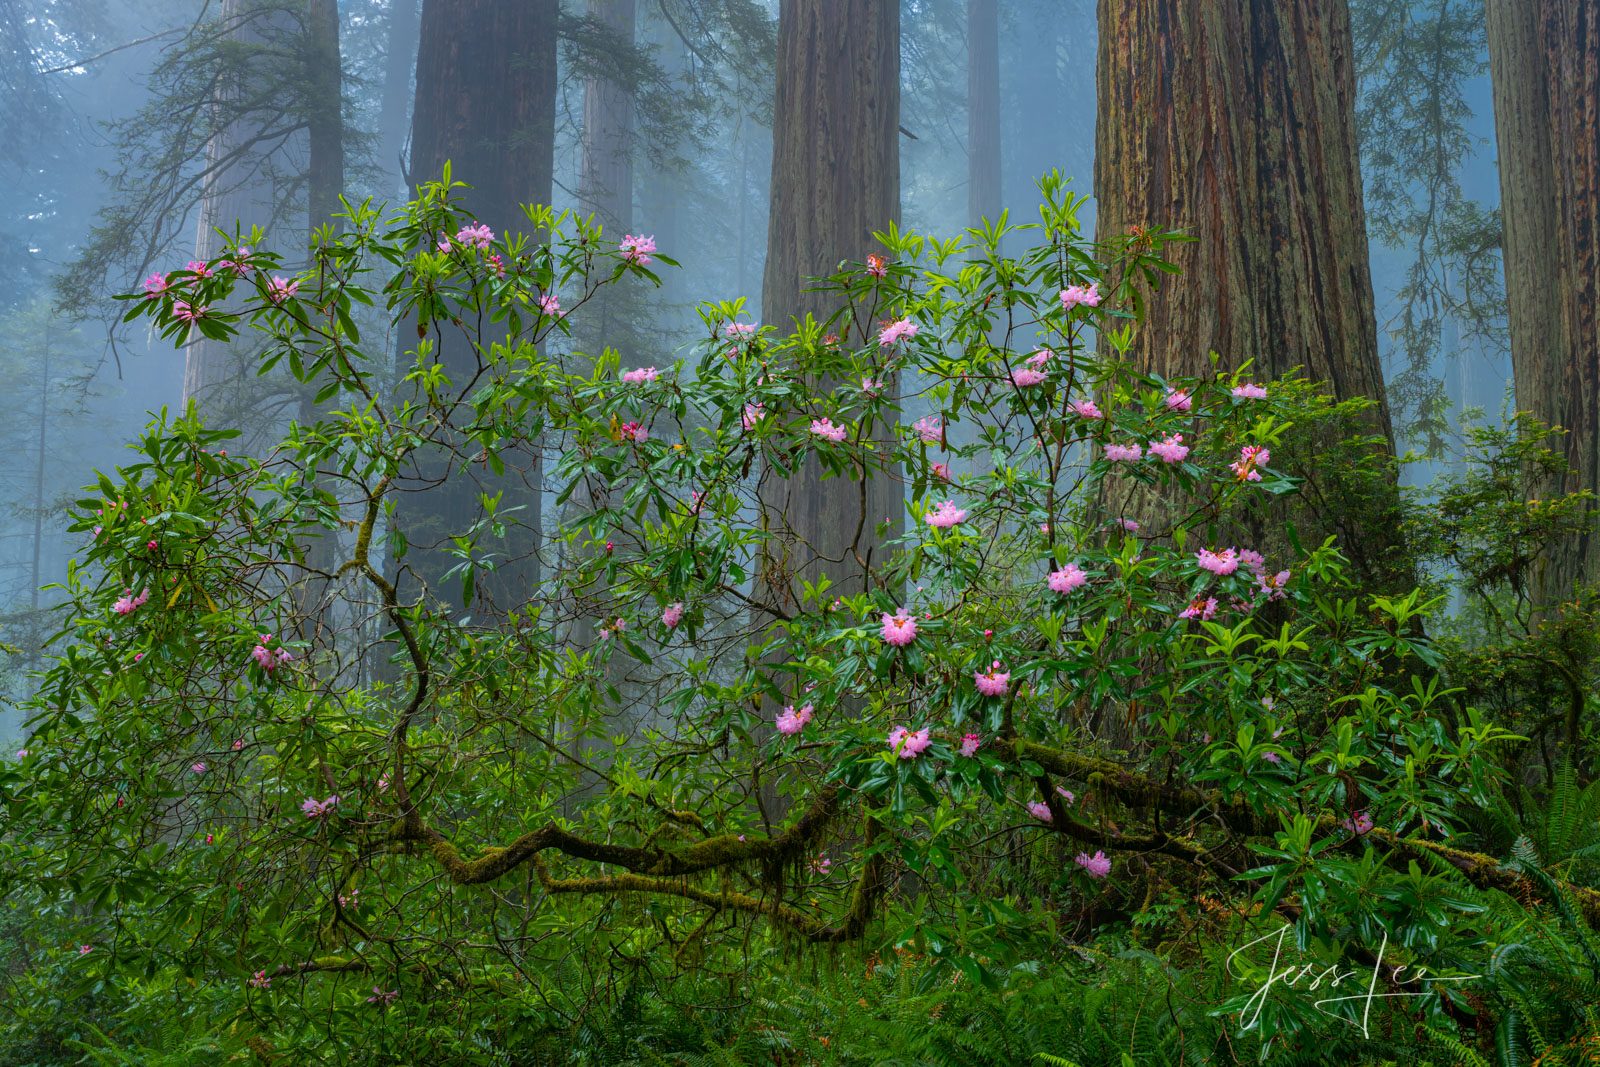 Rhododendrons and redwoods in the misty Redwood Forest.